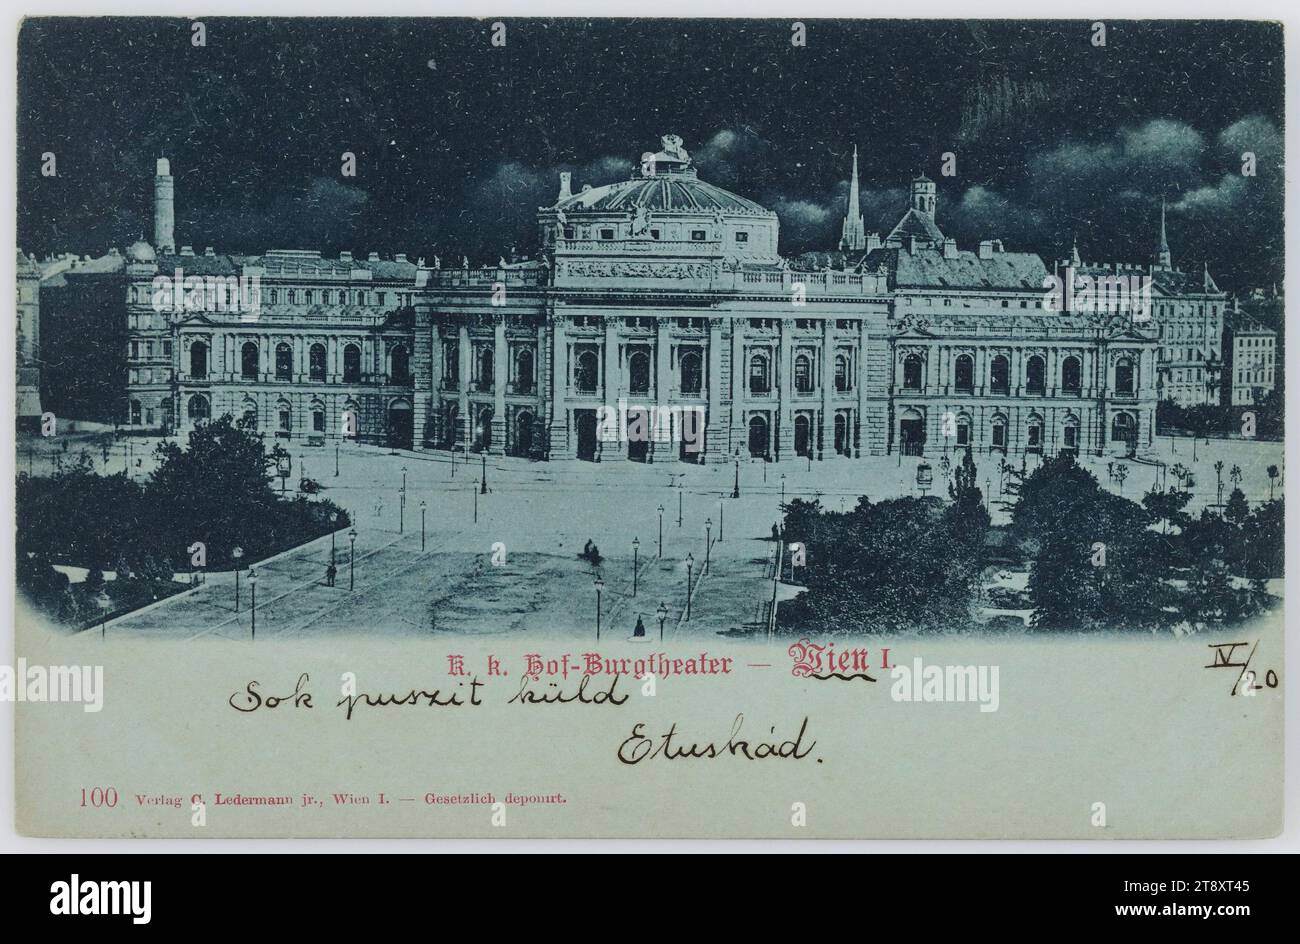 1st, Universitätsring 2 - Burgtheater, by night, view from the town hall, picture postcard, Carl (Karl) Ledermann jun, Producer, 1899, paperboard, Collotype, Inscription, FROM, Vienna, TO, Budapest, ADDRESS, urhölgynek = for woman, Budapest, Wurm-udvar, MESSAGE, Sok puszit küld, Etuskád, Send many kisses, Etuskad, Attractions, Theatre, Ringstraße, Postcards with transliteration, 1st District: Innere Stadt, theatre (building), square, place, circus, etc., street lighting, night, Burgtheater, Universitätsring, handwriting, written text (HUNGARIAN) Stock Photo